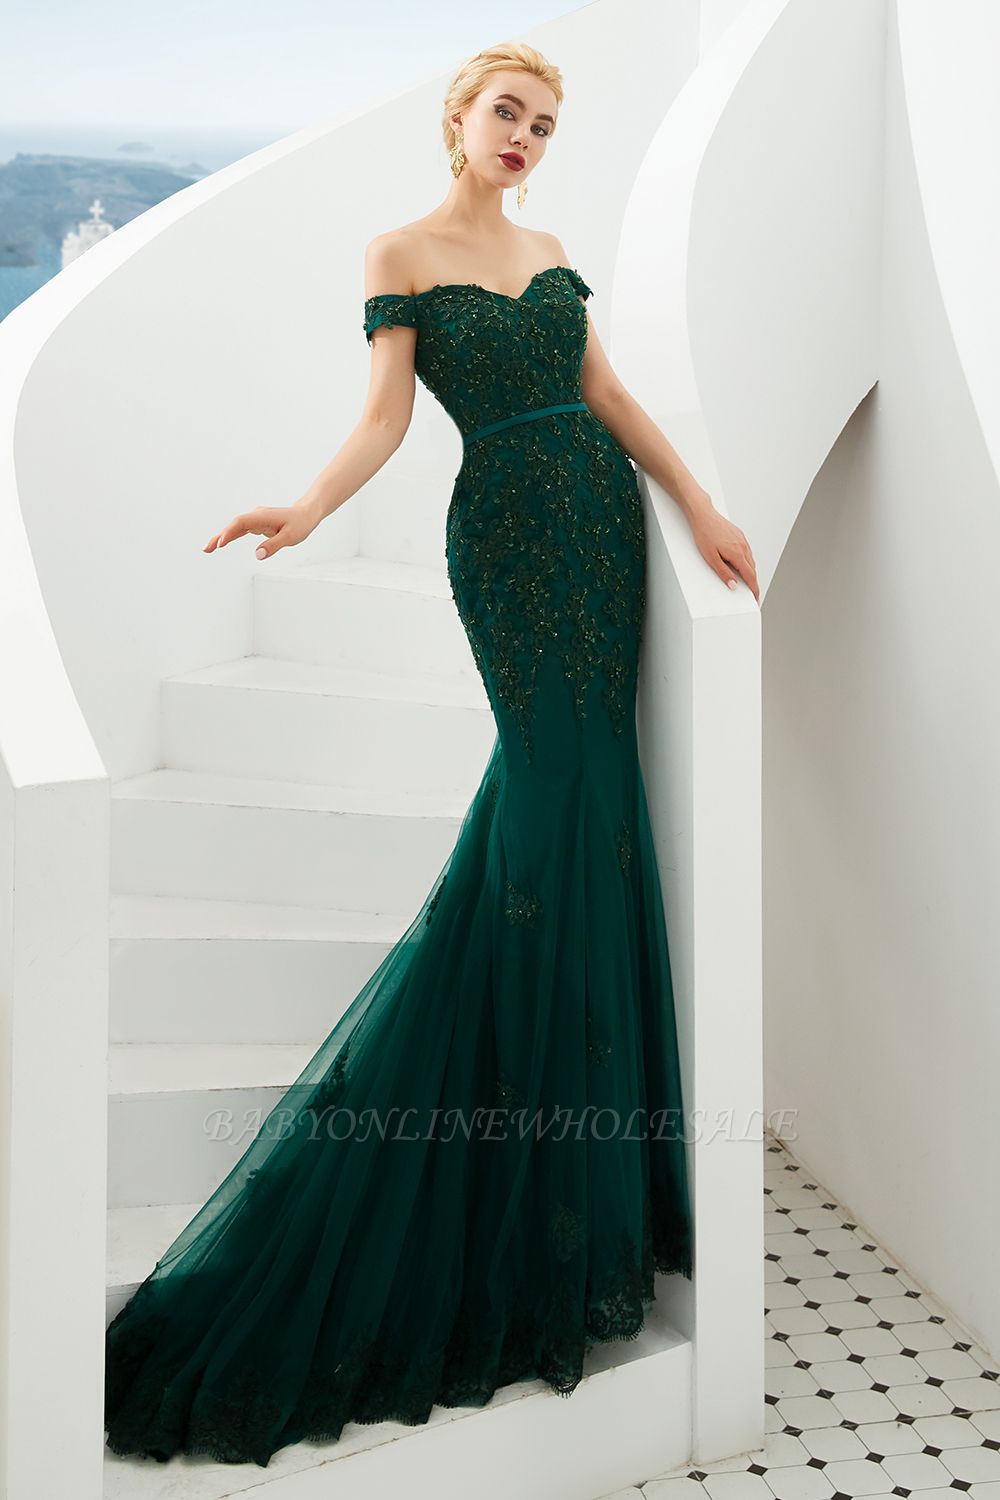 Harvey | Emerald green Mermaid Tulle Prom dress with Beaded Lace ...